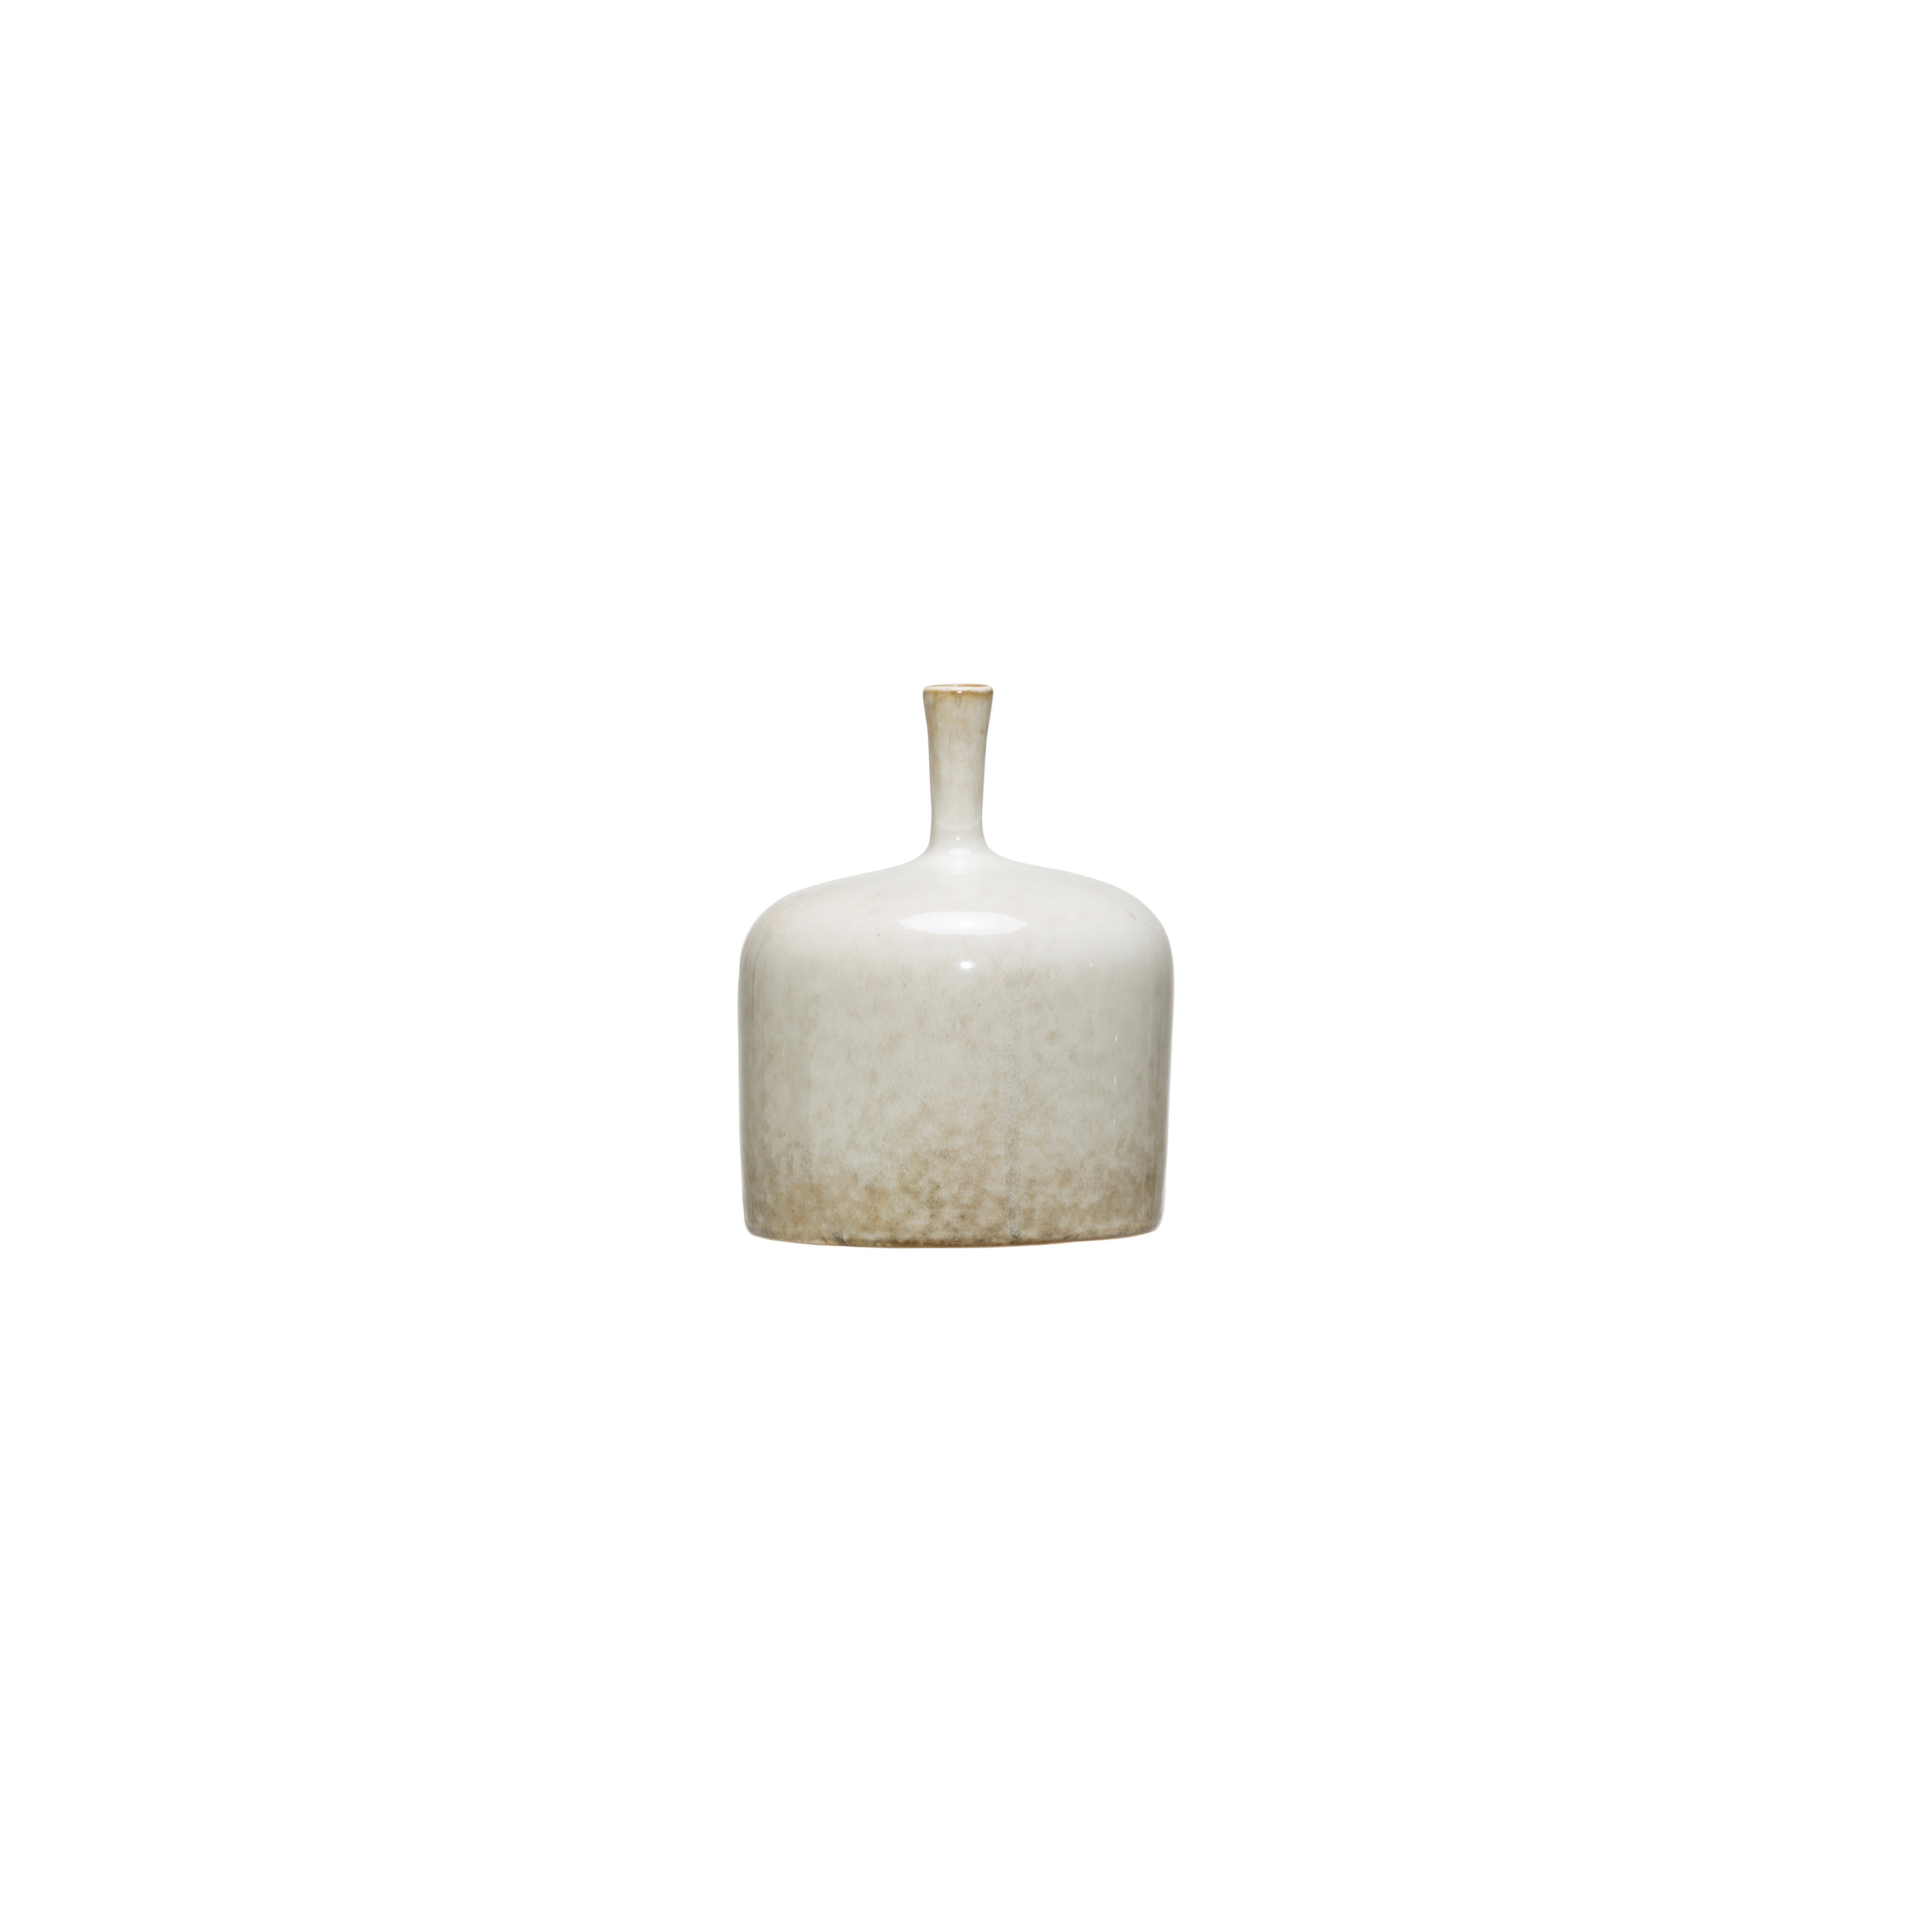 Small Cream Stoneware Vase with Reactive Glaze Finish (Each one will vary) - Nomad Home